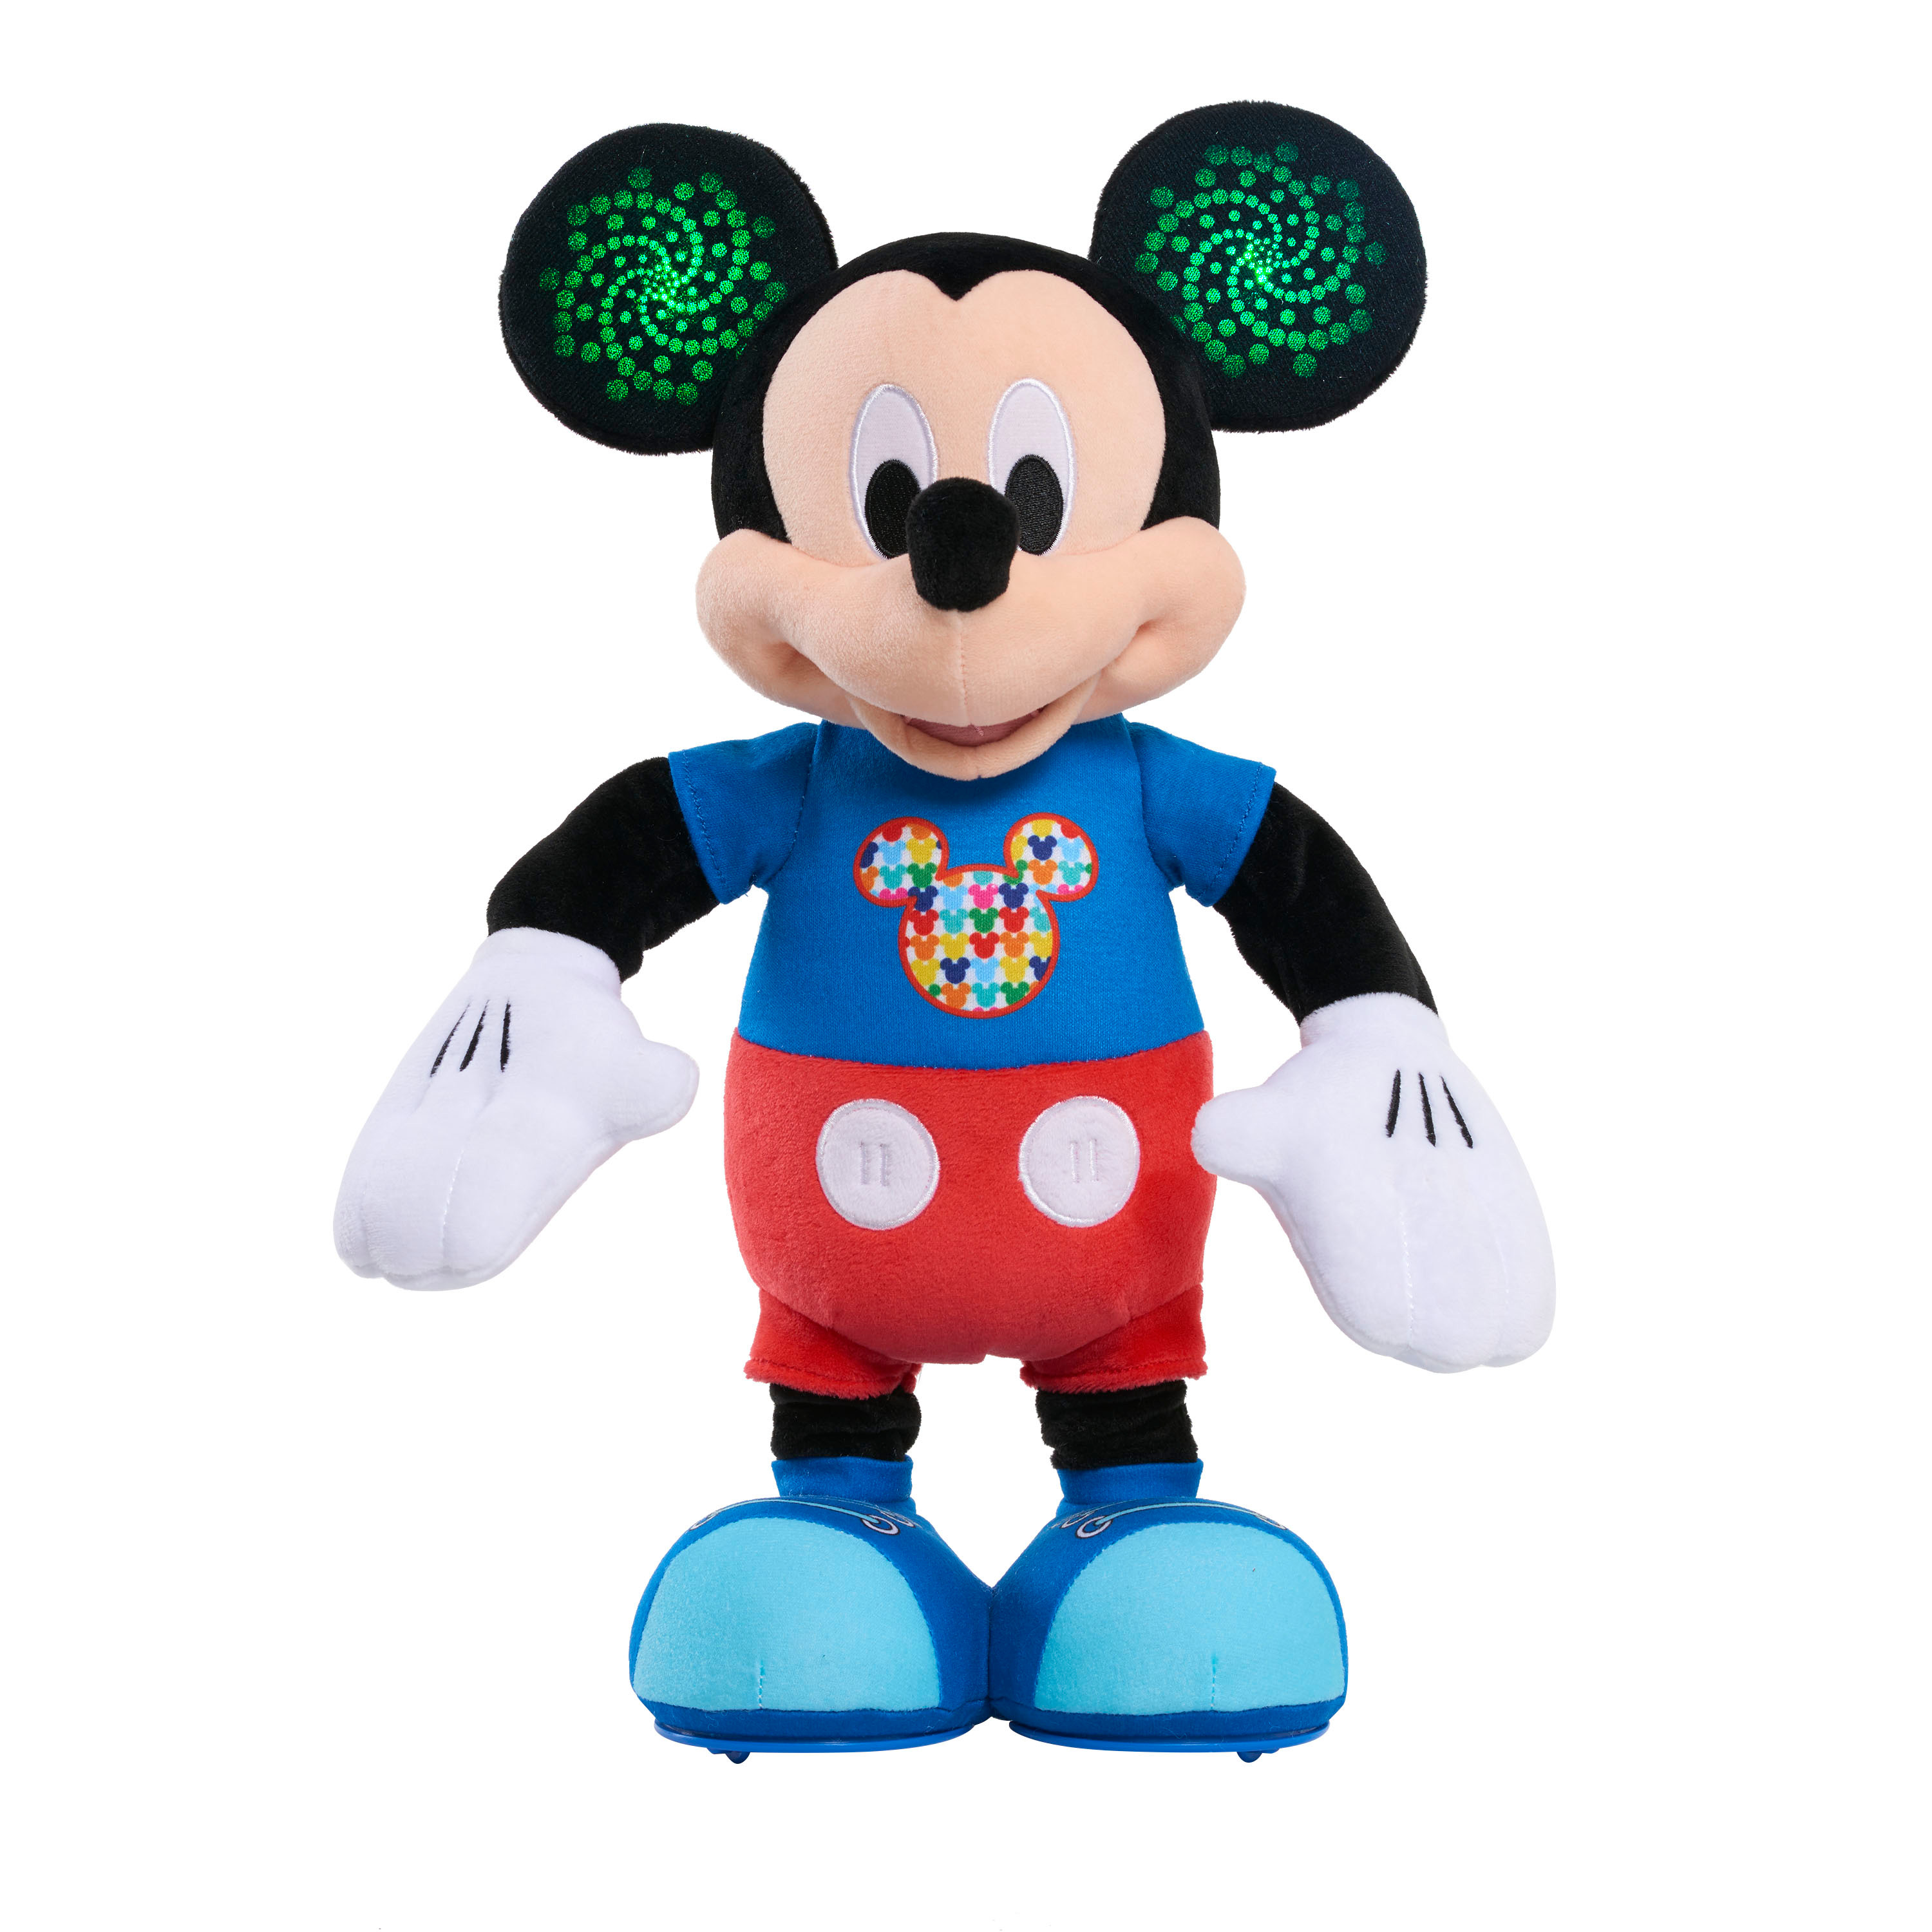 Disney Junior Hot Dog Dance Break Mickey Mouse, Interactive Plush Toy, Lights Up and Sings "Hot Dog Song" and Plays “Color Detective” Game, Kids Toys for Ages 3 up - image 4 of 4